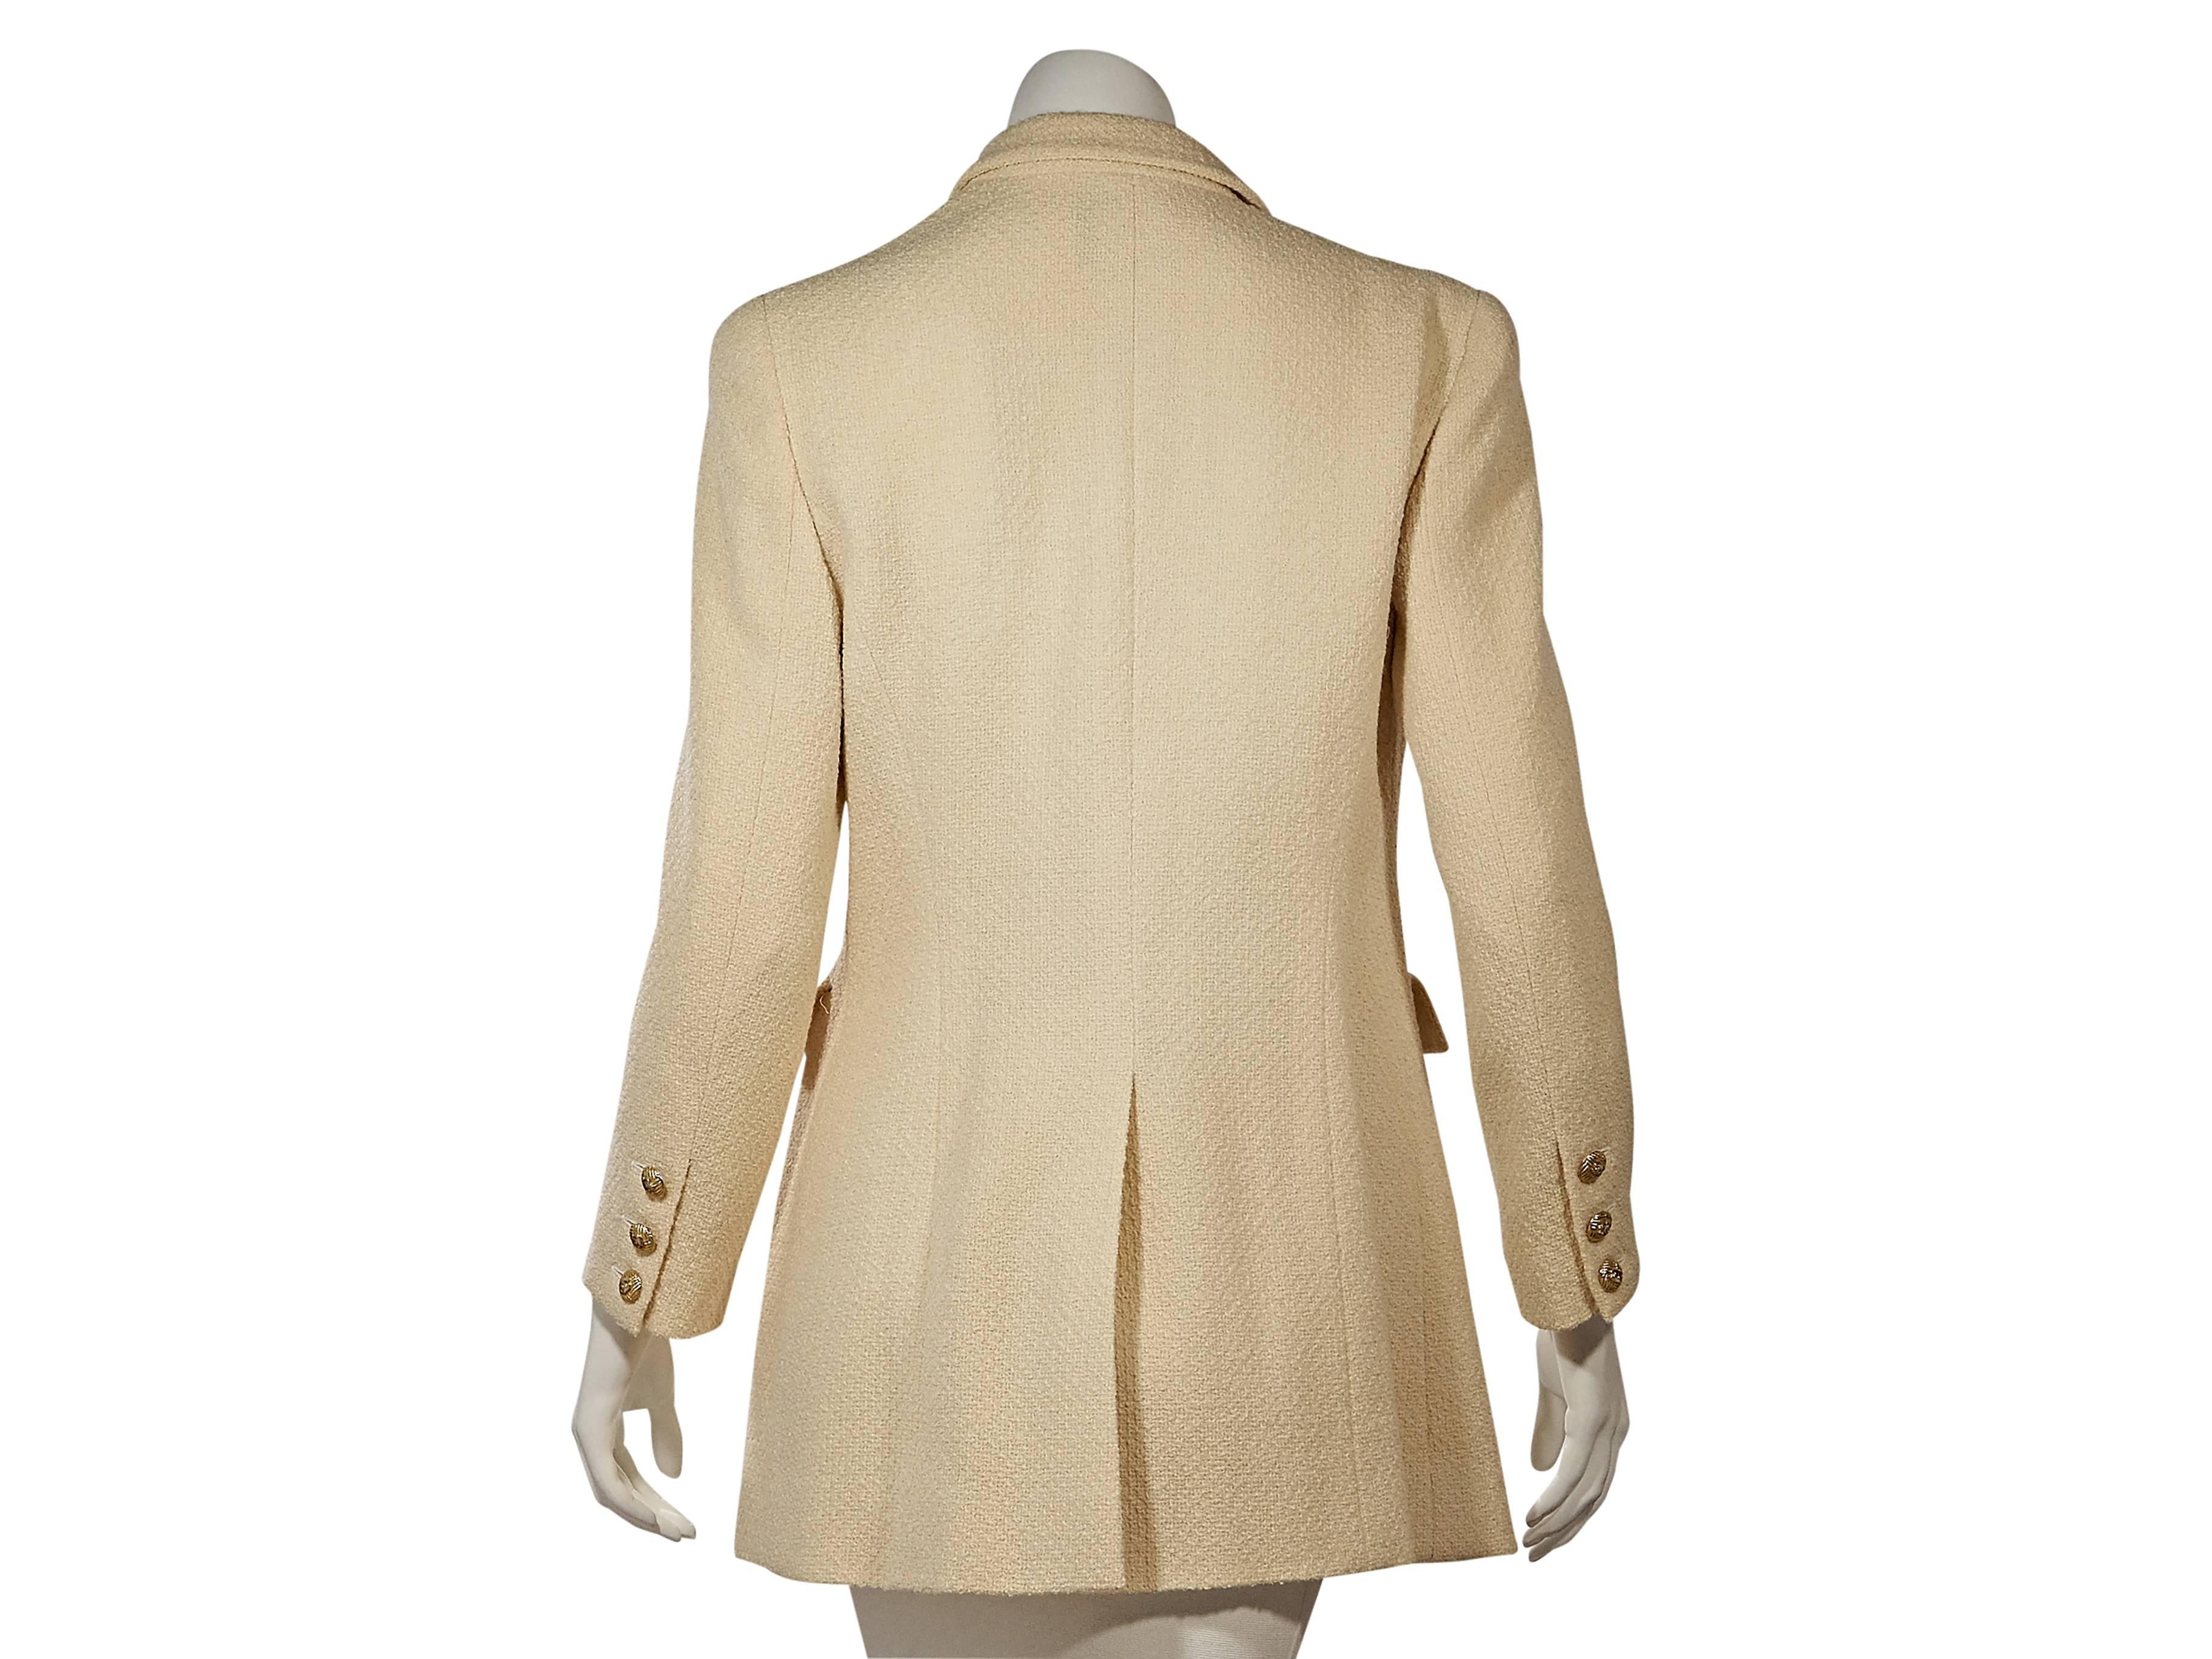 Product details:  ﻿Vintage cream textured jacket by Chanel.  Rounded notched lapel.  Long sleeves.  Triple-button detail at cuffs.  Button-front closure.  Waist flap pockets.  Back hem vent.   
Condition: Very good. 